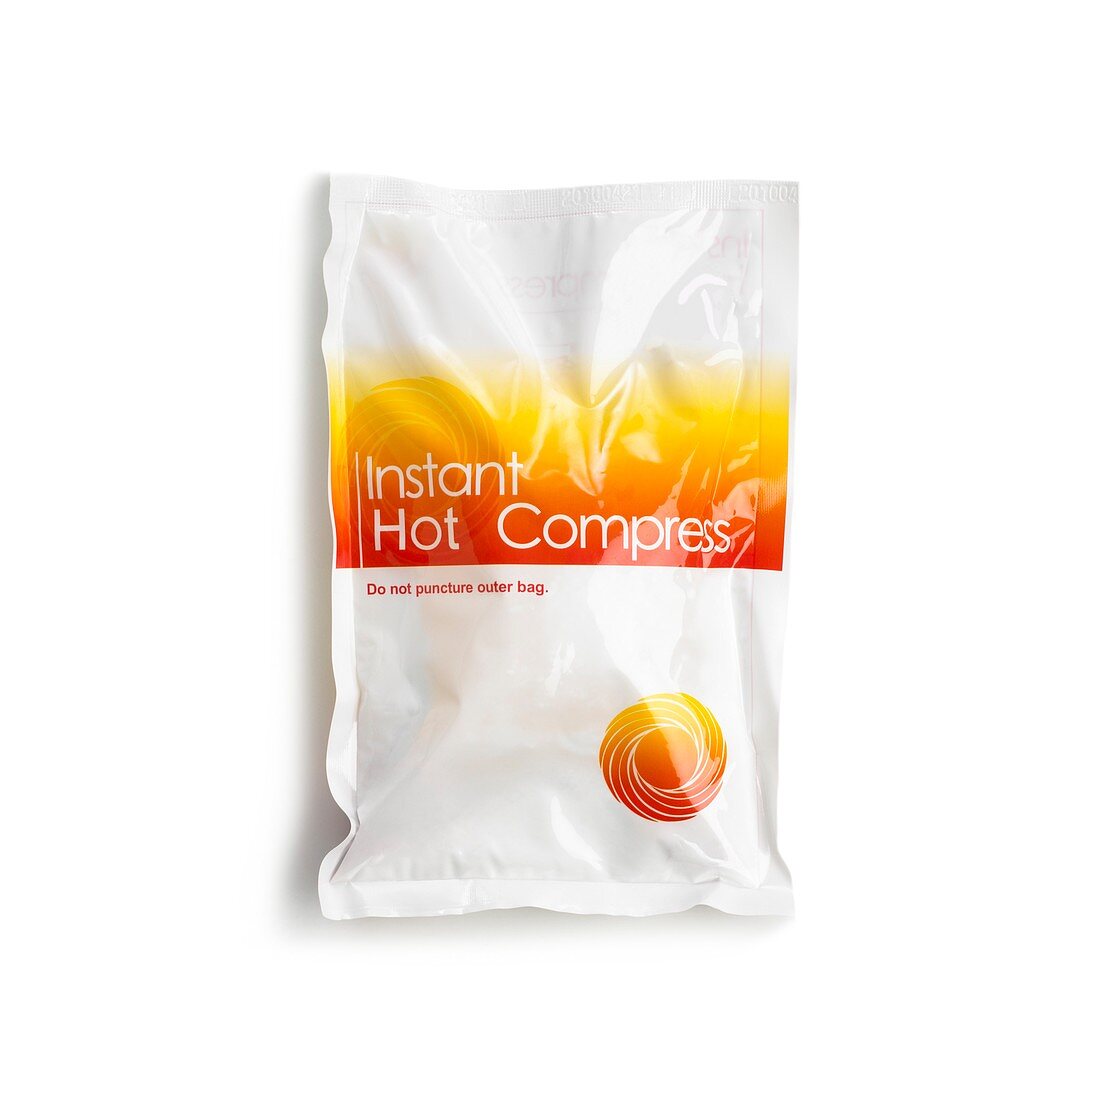 Hot compress pain relief